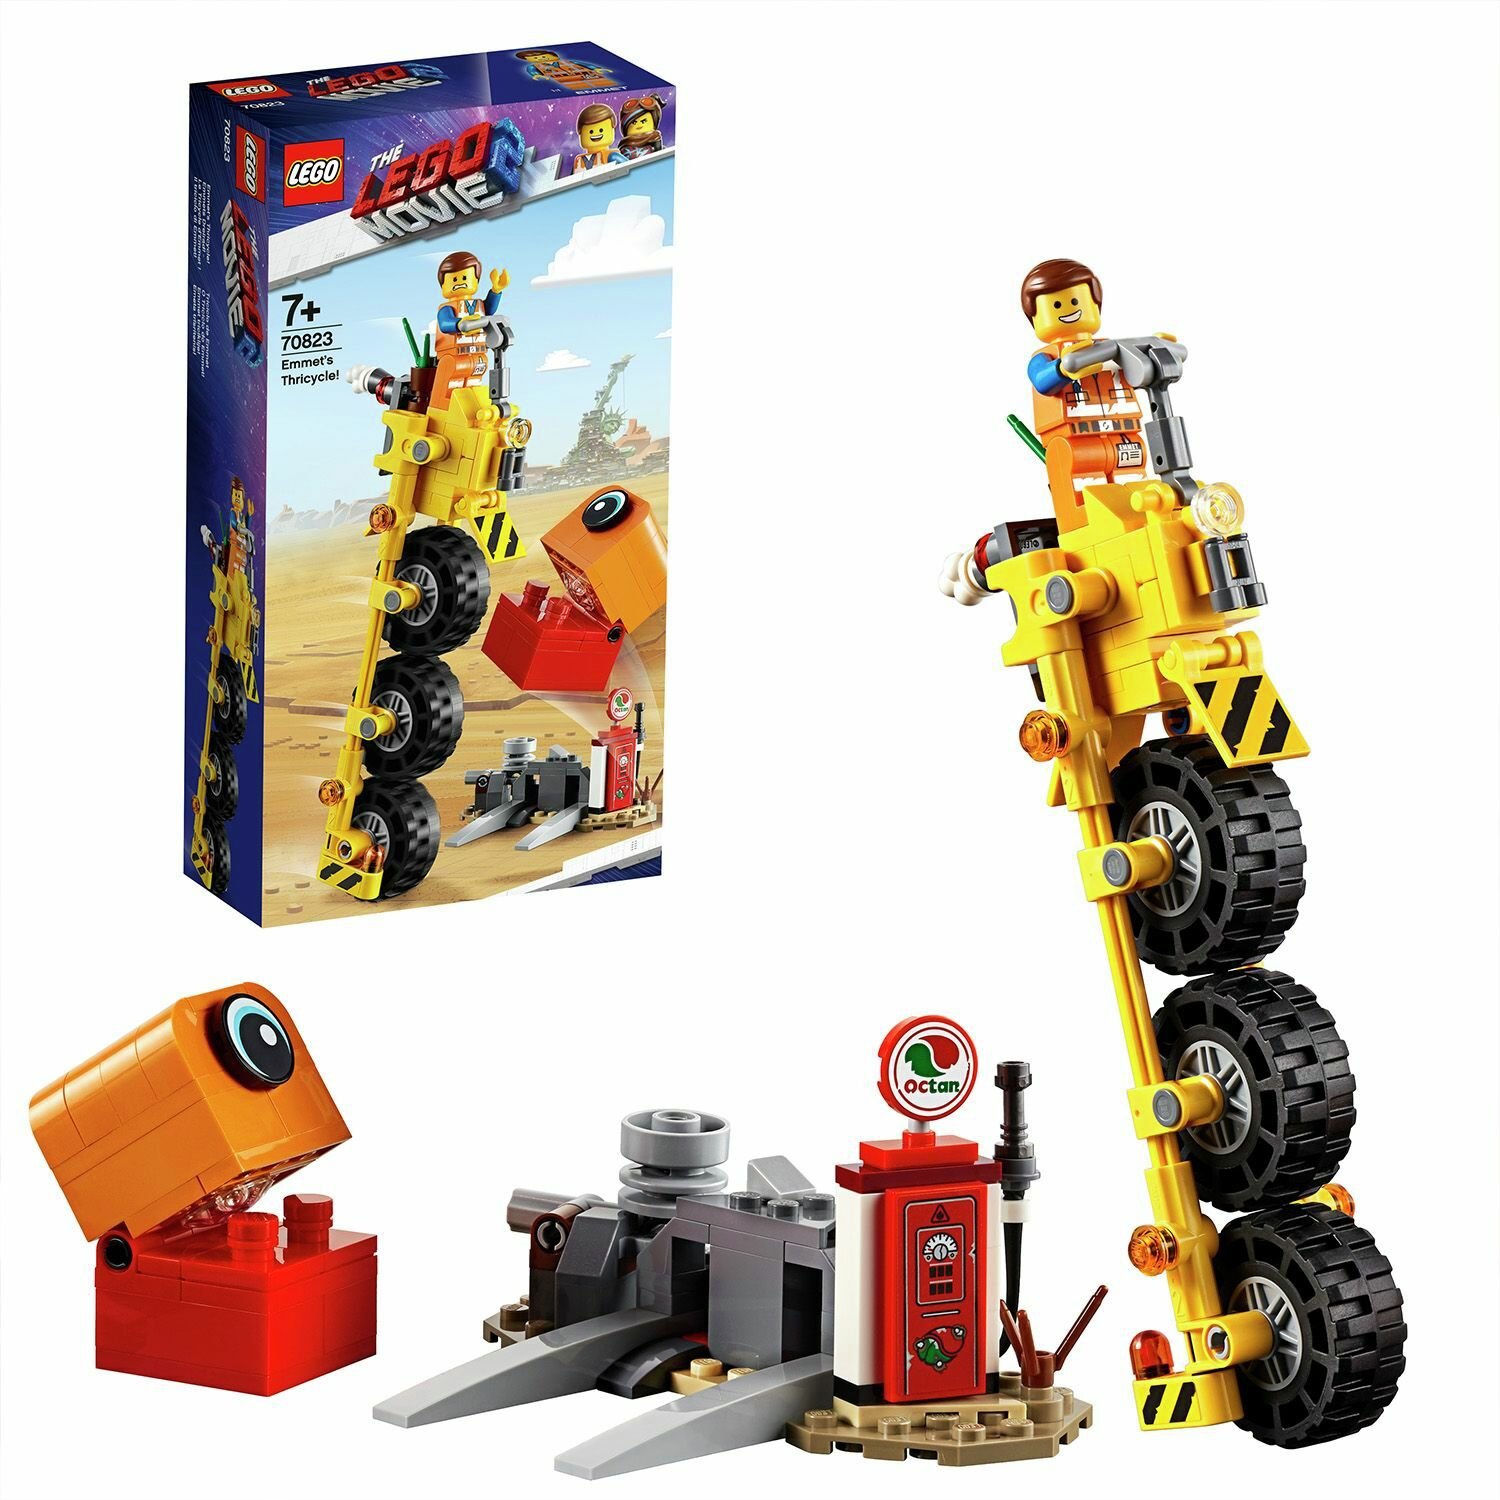 LEGO Movie 2 Emmets Thricycle- 70823 review